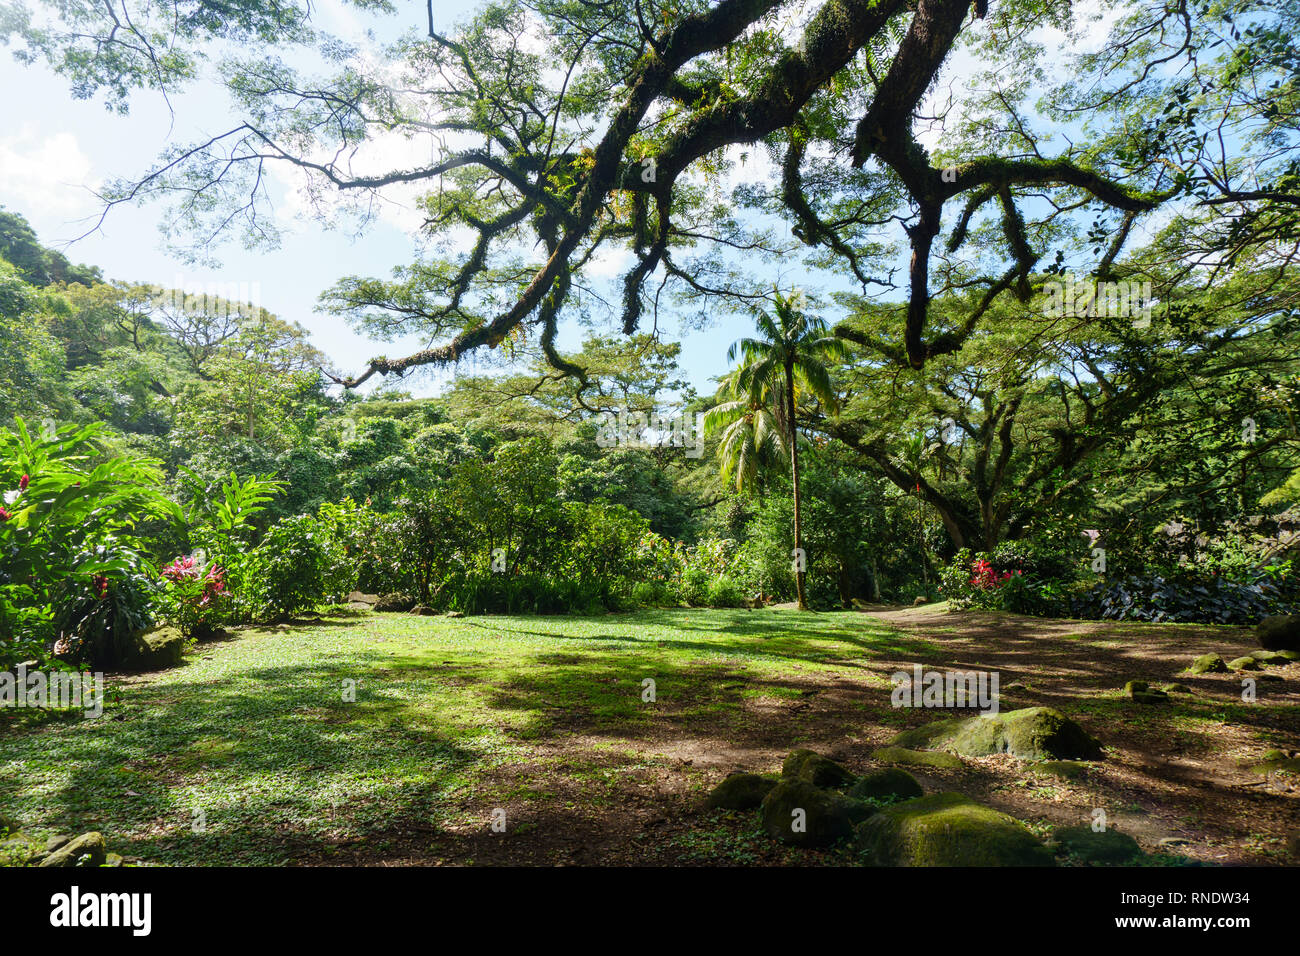 Martinique old tree in garden Stock Photo - Alamy